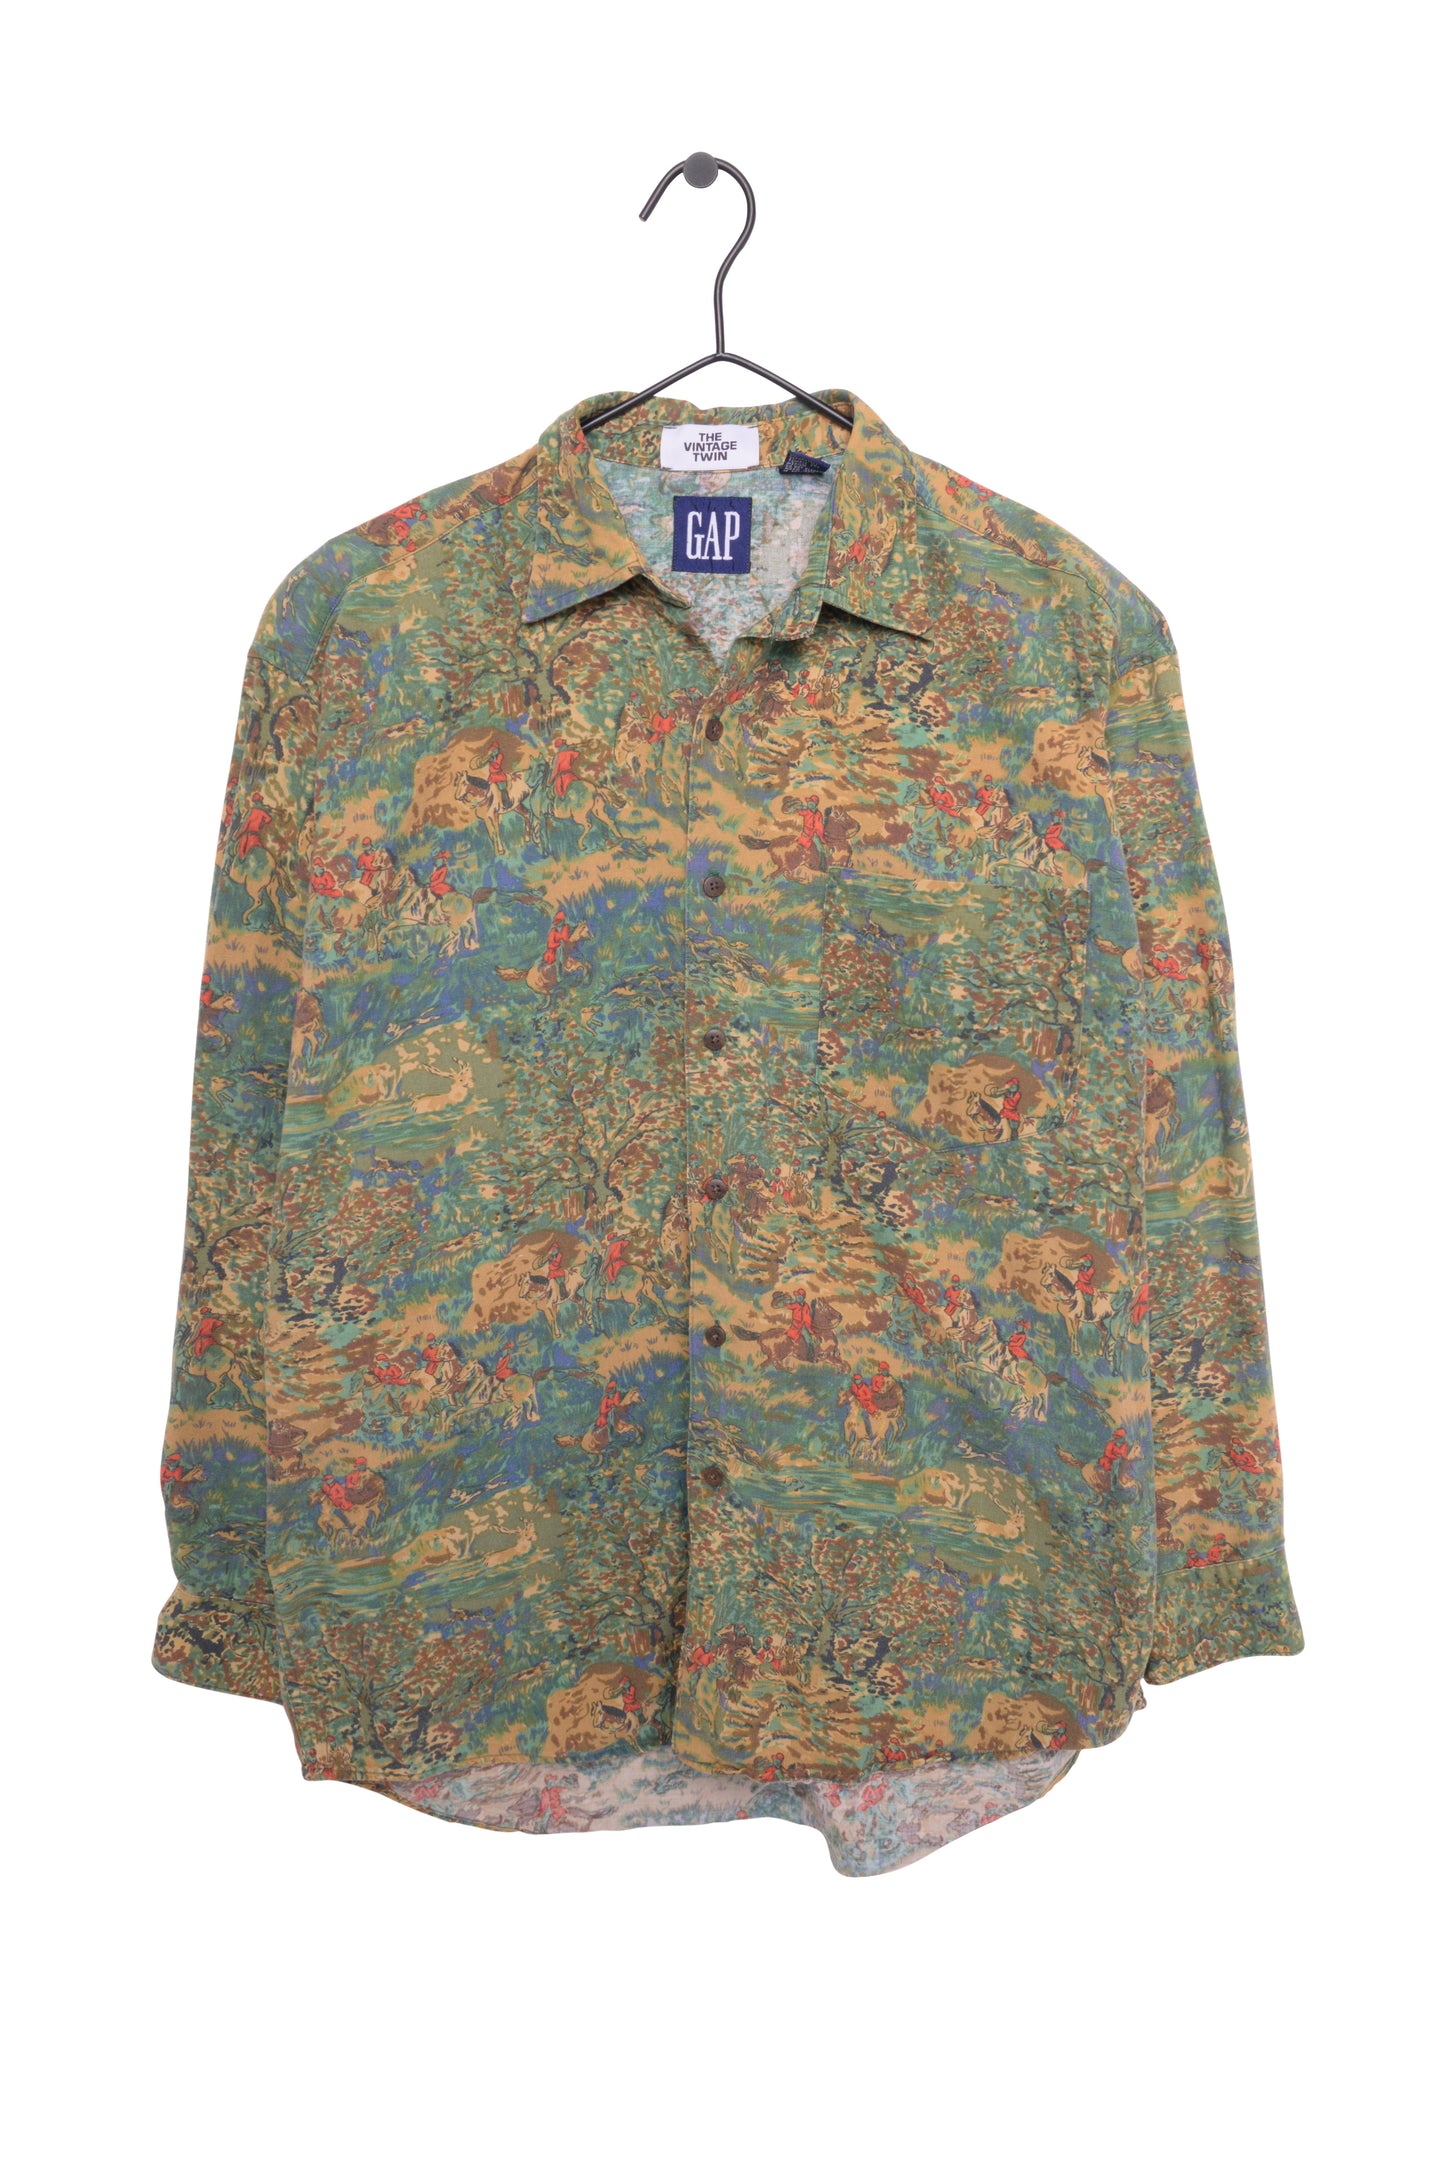 1990s Gap Horses All-Over Button Down